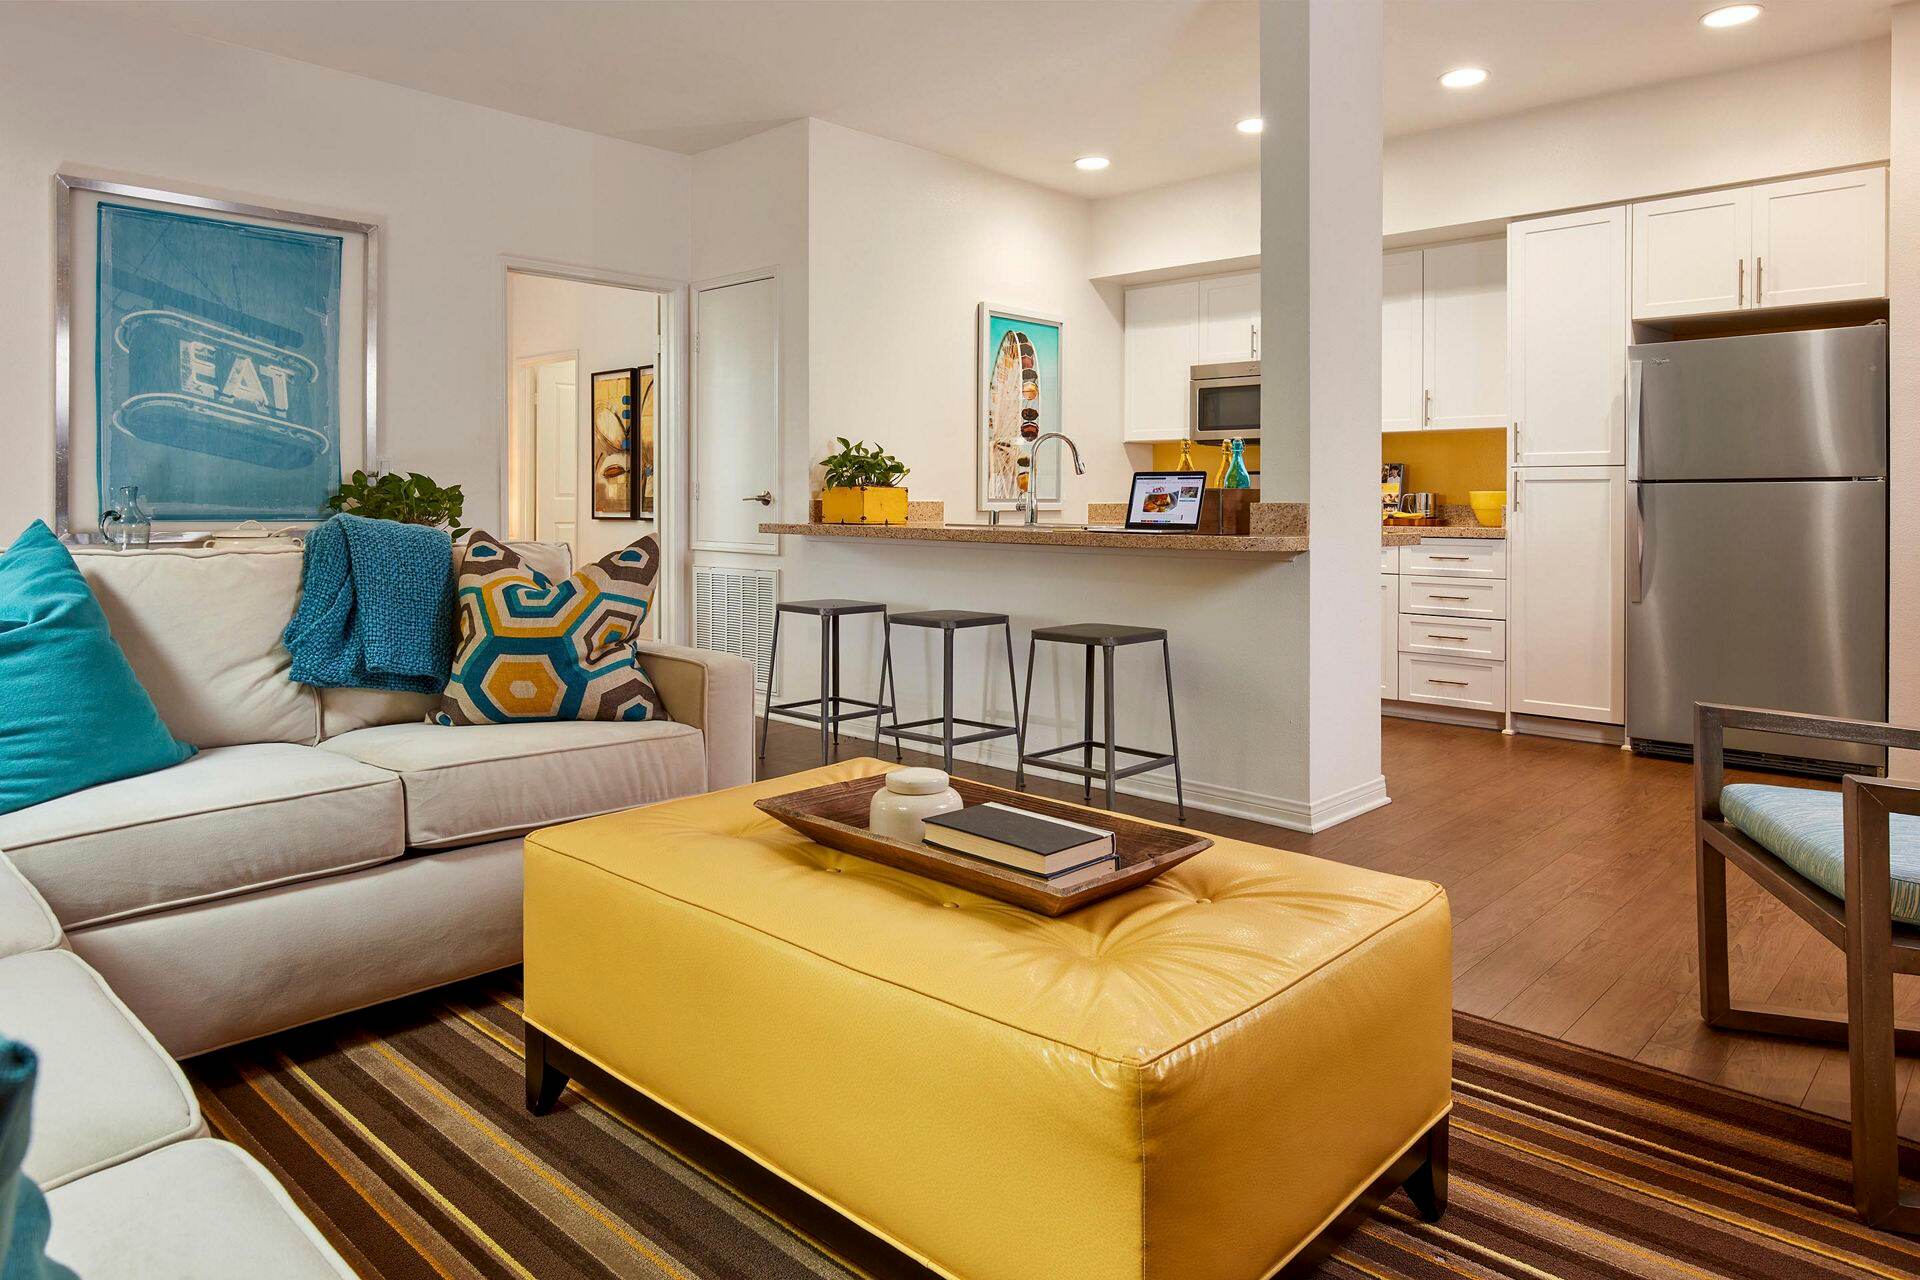 Interior view of living room and kitchen at Stewart Village Apartment Homes in Sunnyvale, CA.